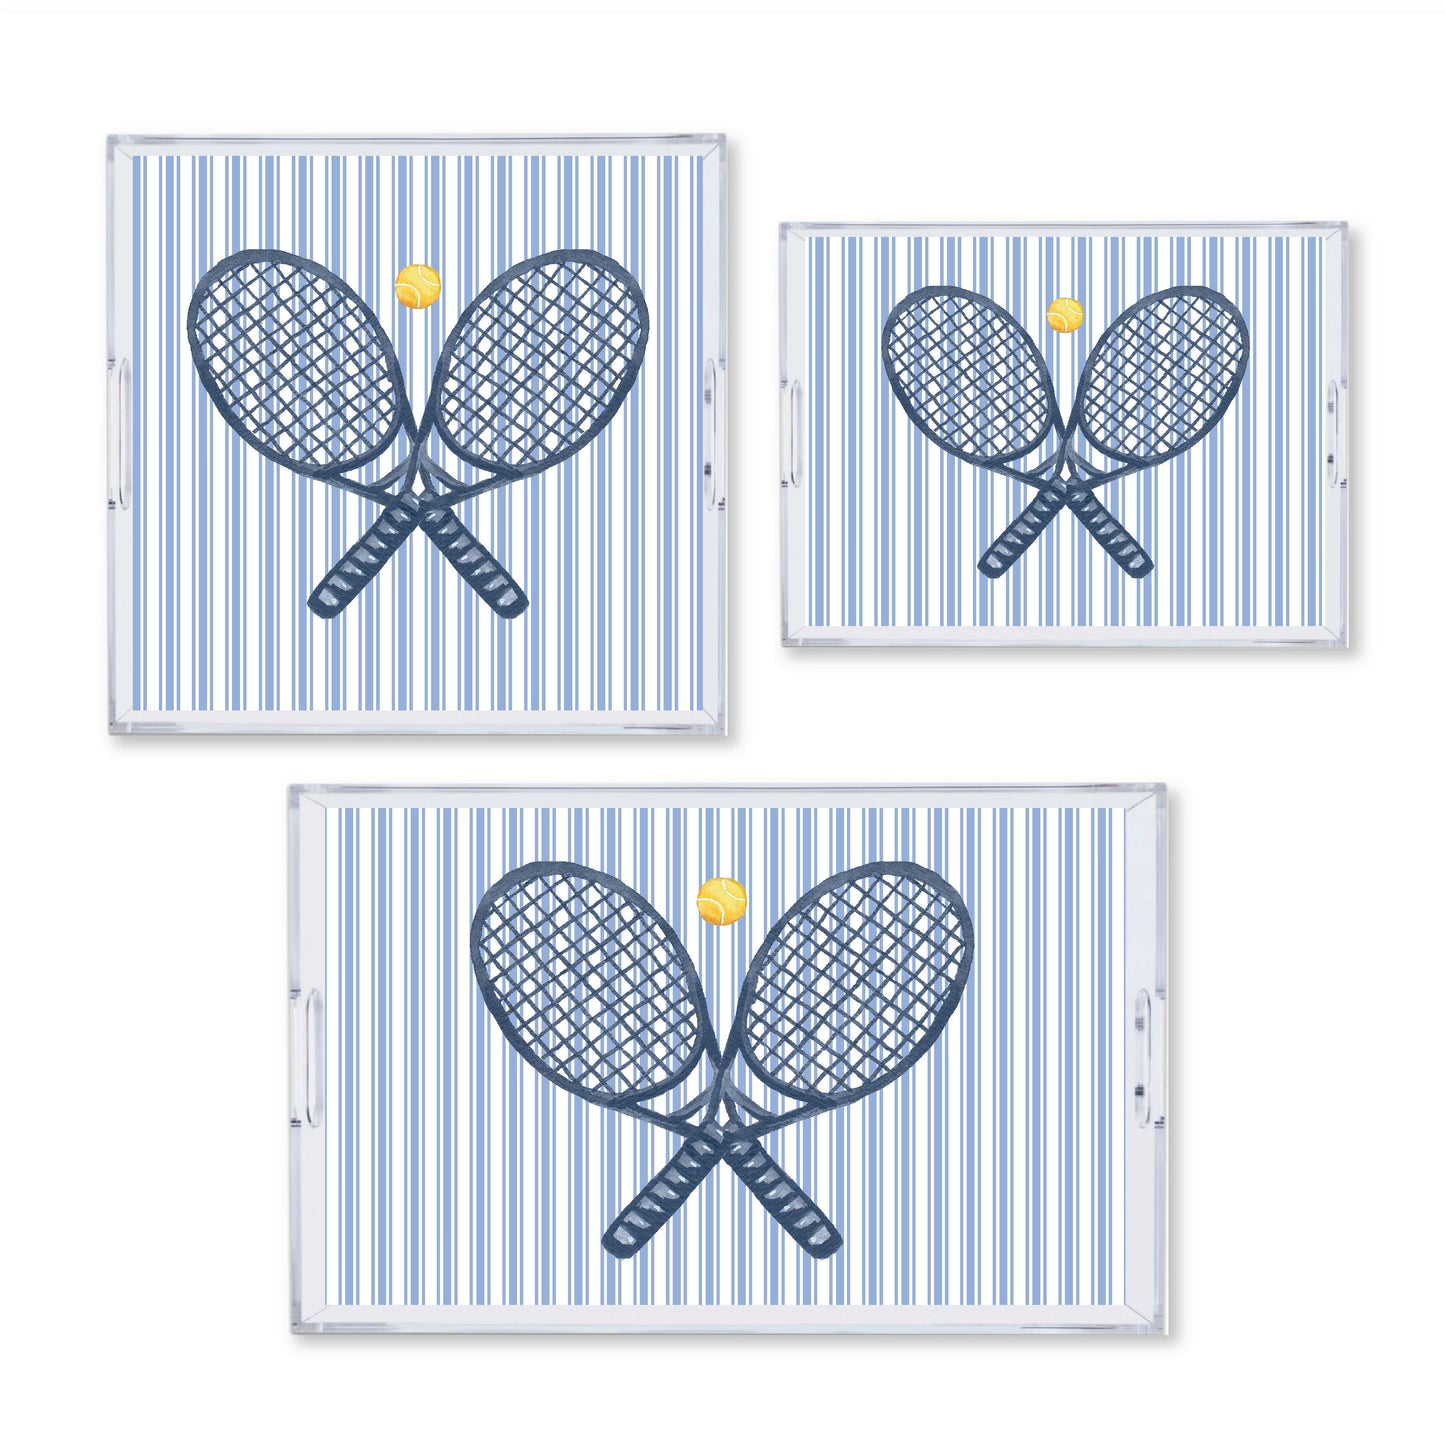 Tennis, Anyone? Luxury Acrylic Tray - Available In 3 Sizes